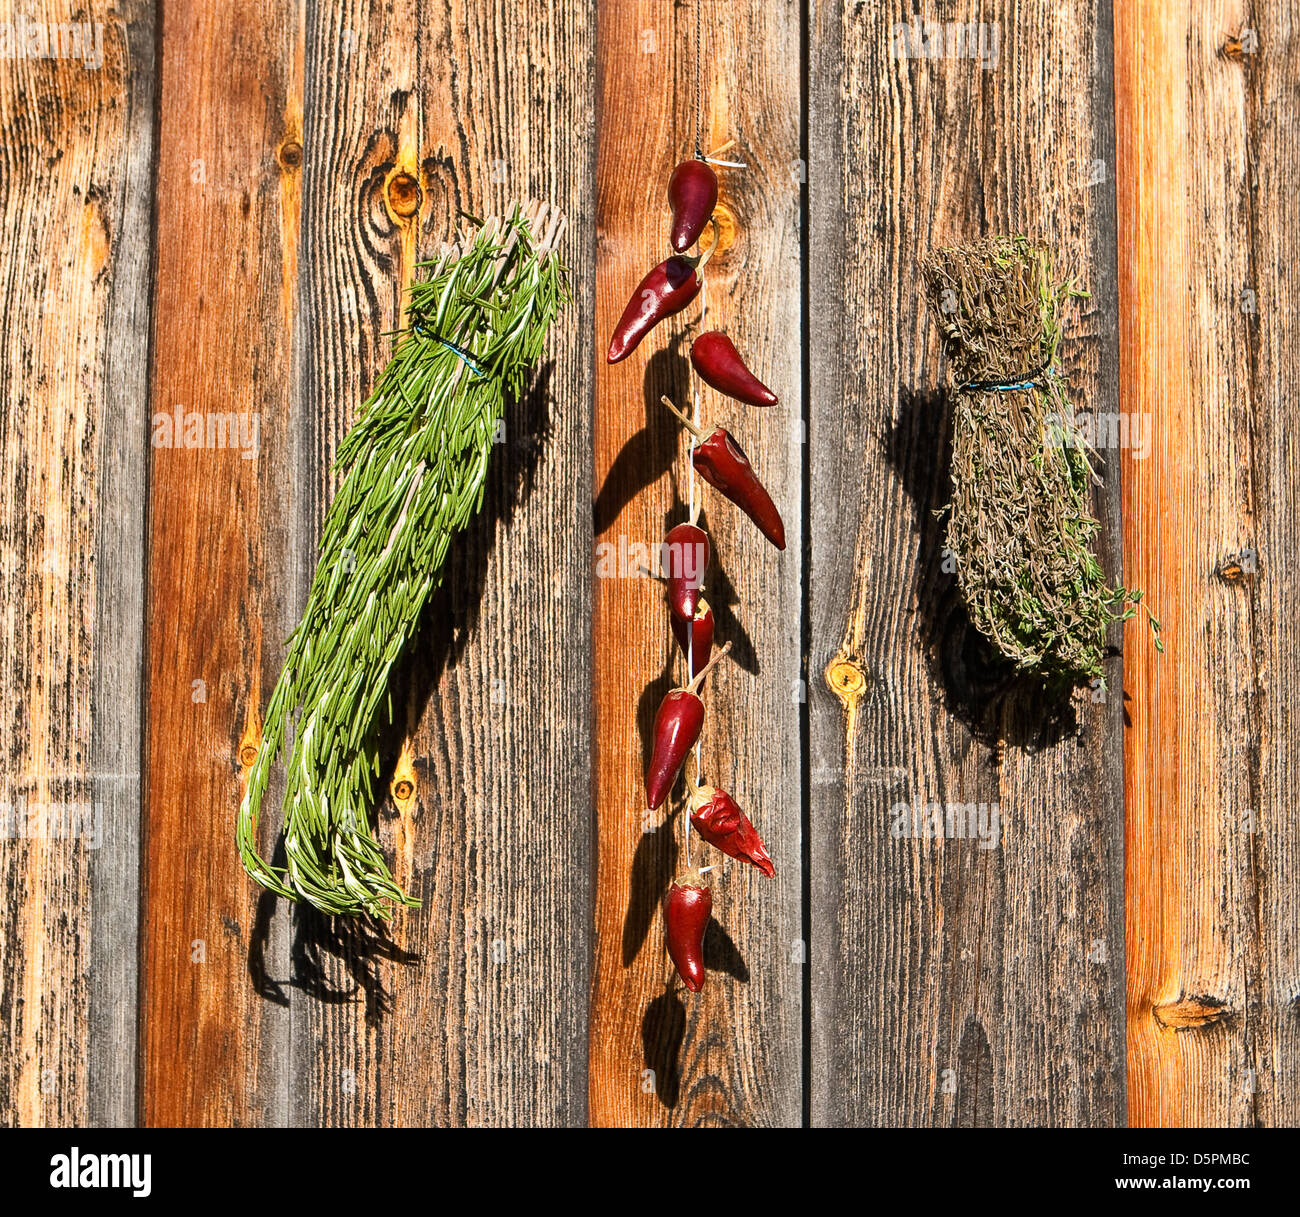 Drying of spices - rosemary, red pepper, a thyme Stock Photo